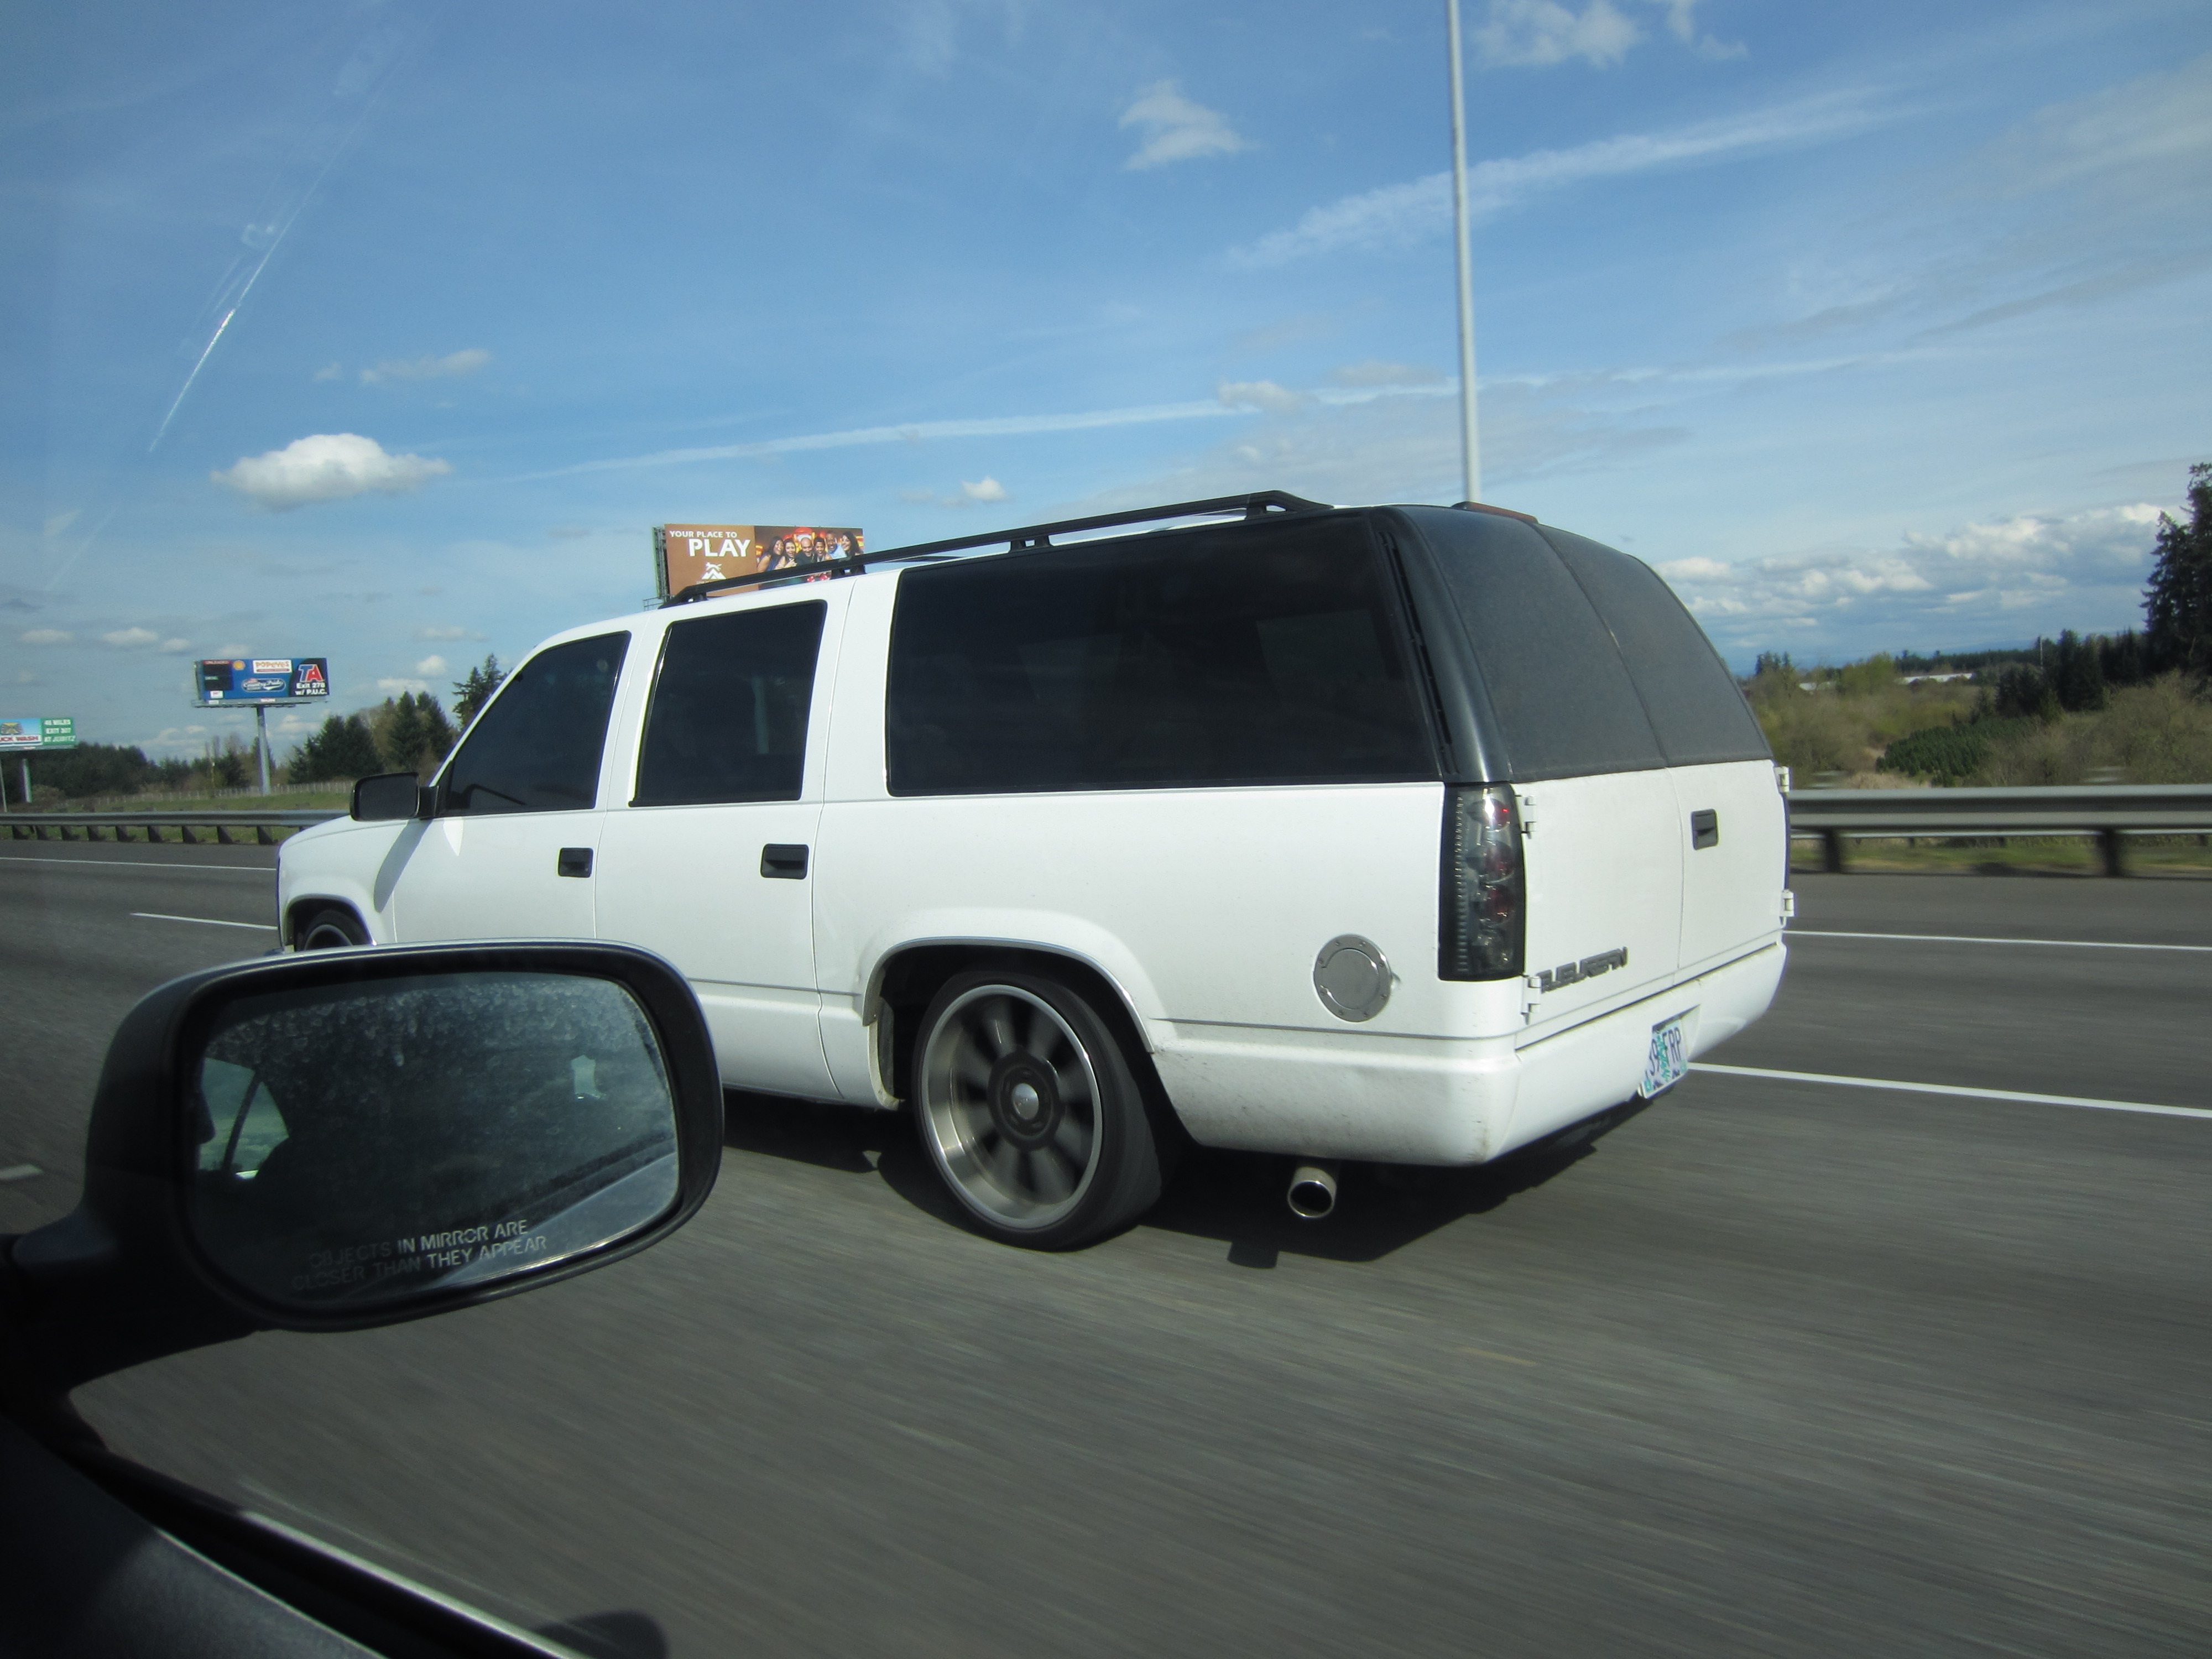 A Lowered Suburban – Not Your Average Engineer